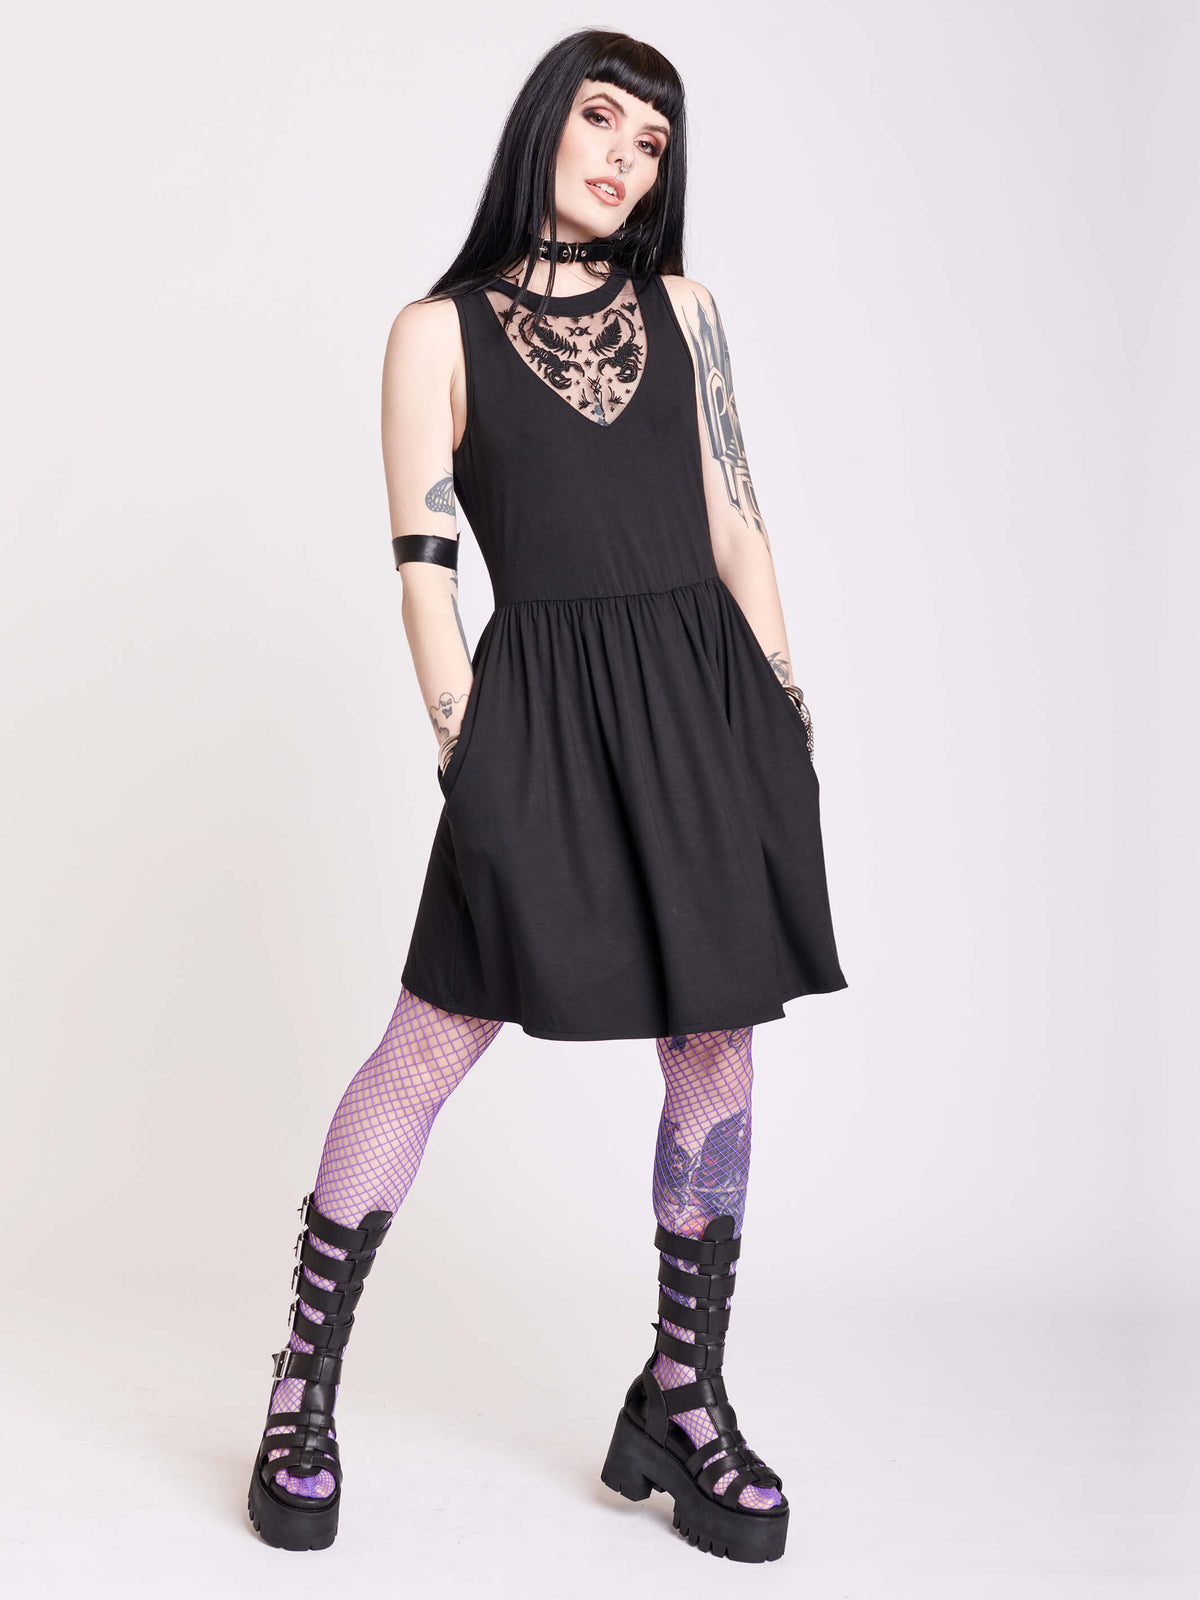 Scorpion embroidered dress with pockets